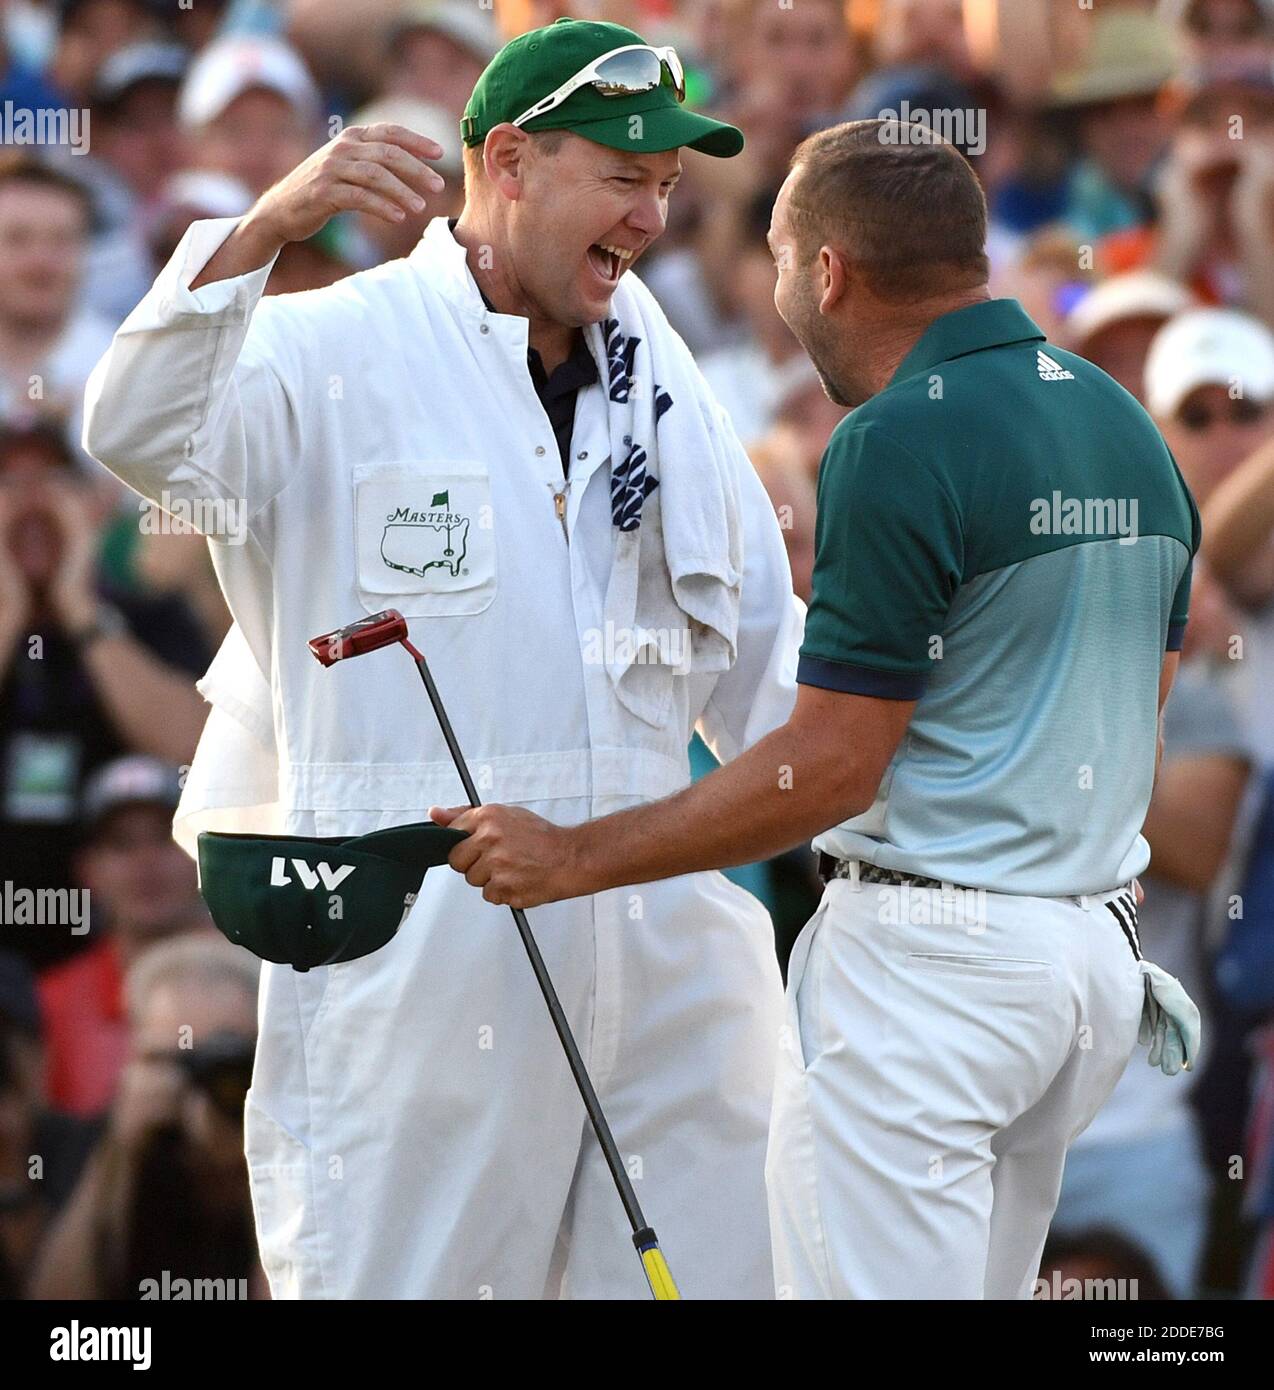 NO FILM, NO VIDEO, NO TV, NO DOCUMENTARY - Caddie Glen Murray, left, embraces Sergio Garcia after Garcia defeated Justin Rose in a one-hole playoff on the 18th green on Sunday, April 9, 2017 at Augusta National Golf Club in Augusta, GA, USA. Photo by Jeff Siner/Charlotte Observer/TNS/ABACAPRESS.COM Stock Photo